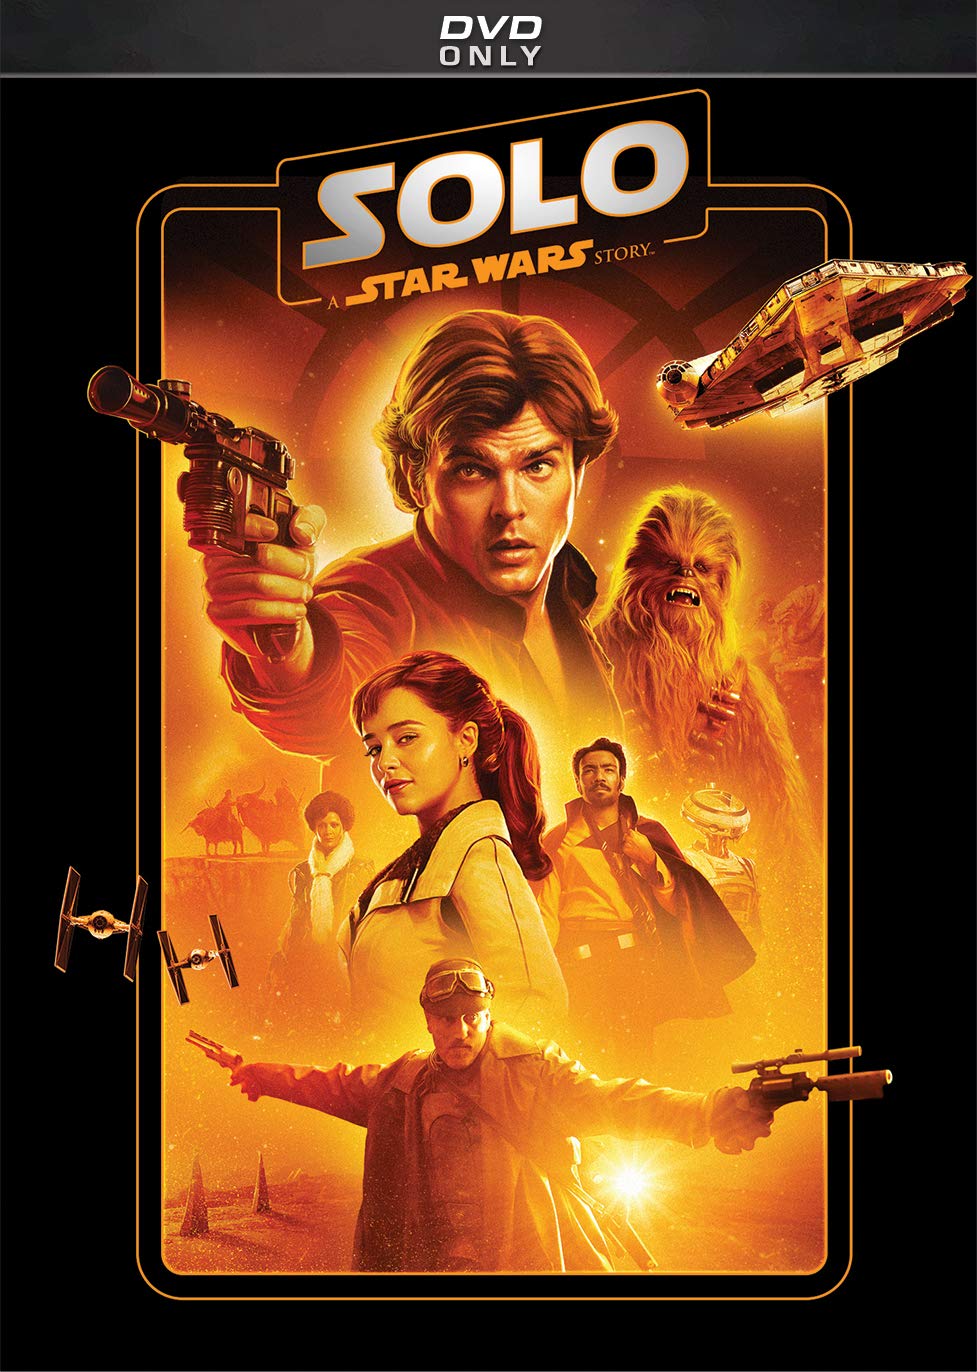 solo-a-star-wars-story-dvd-release-date-september-25-2018